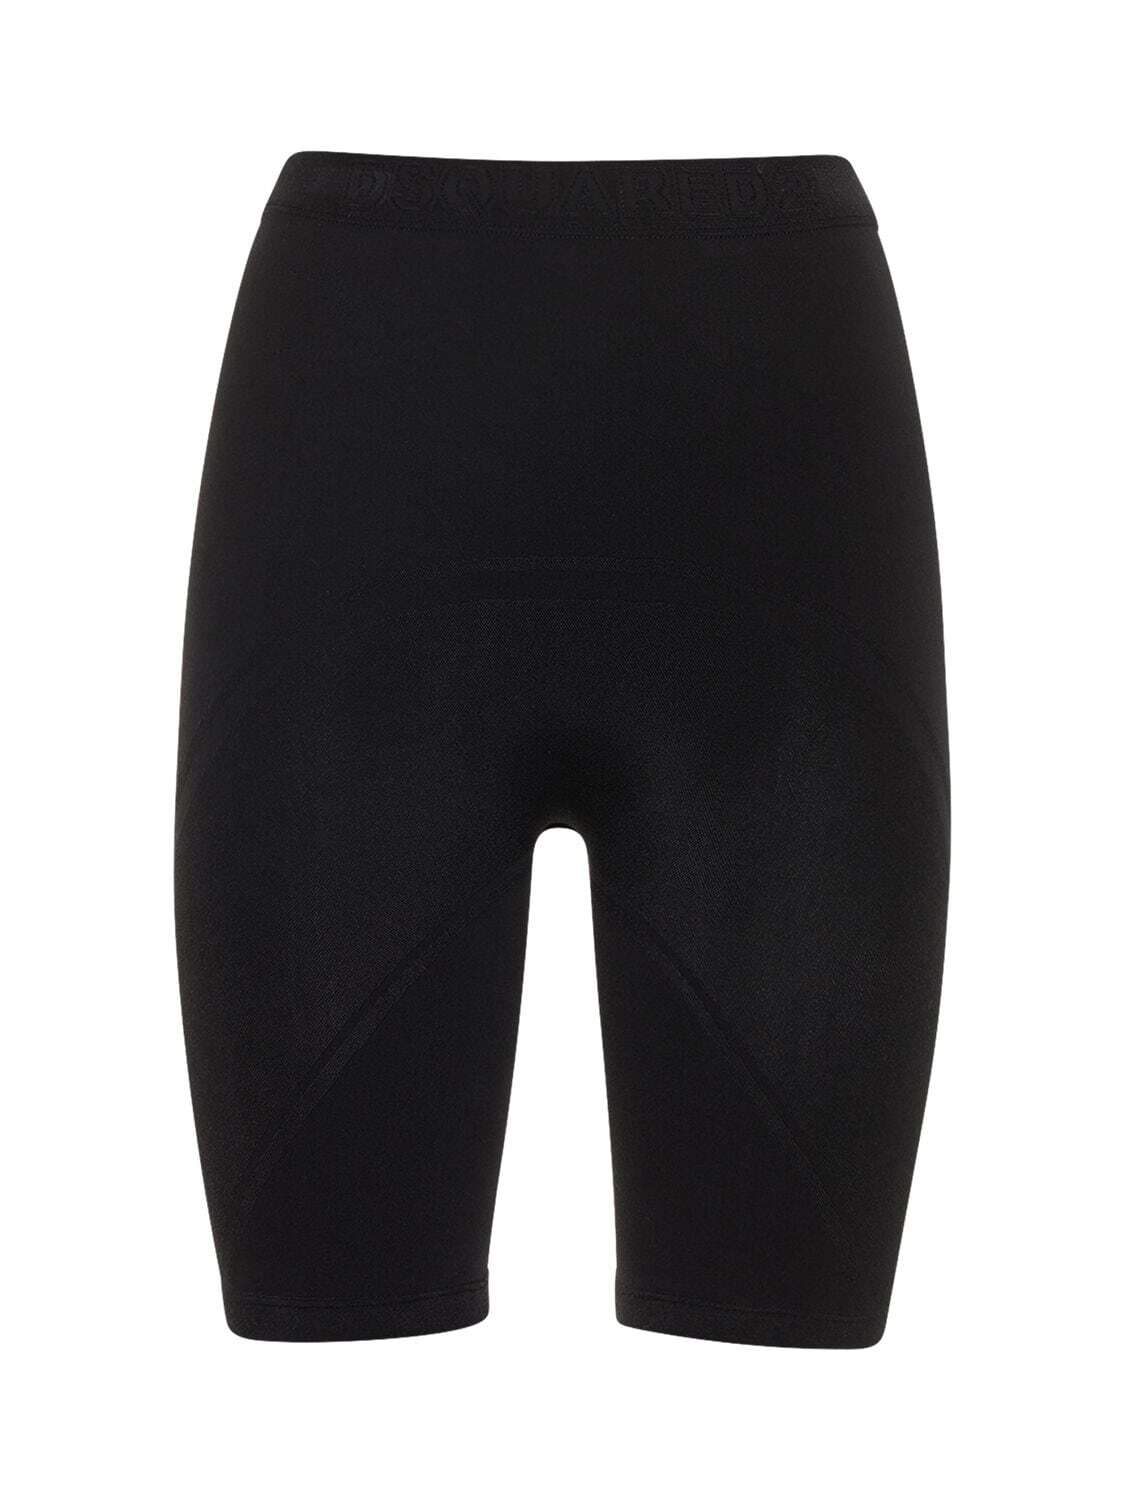 DSQUARED2 Shaping Jersey Bike Shorts in black